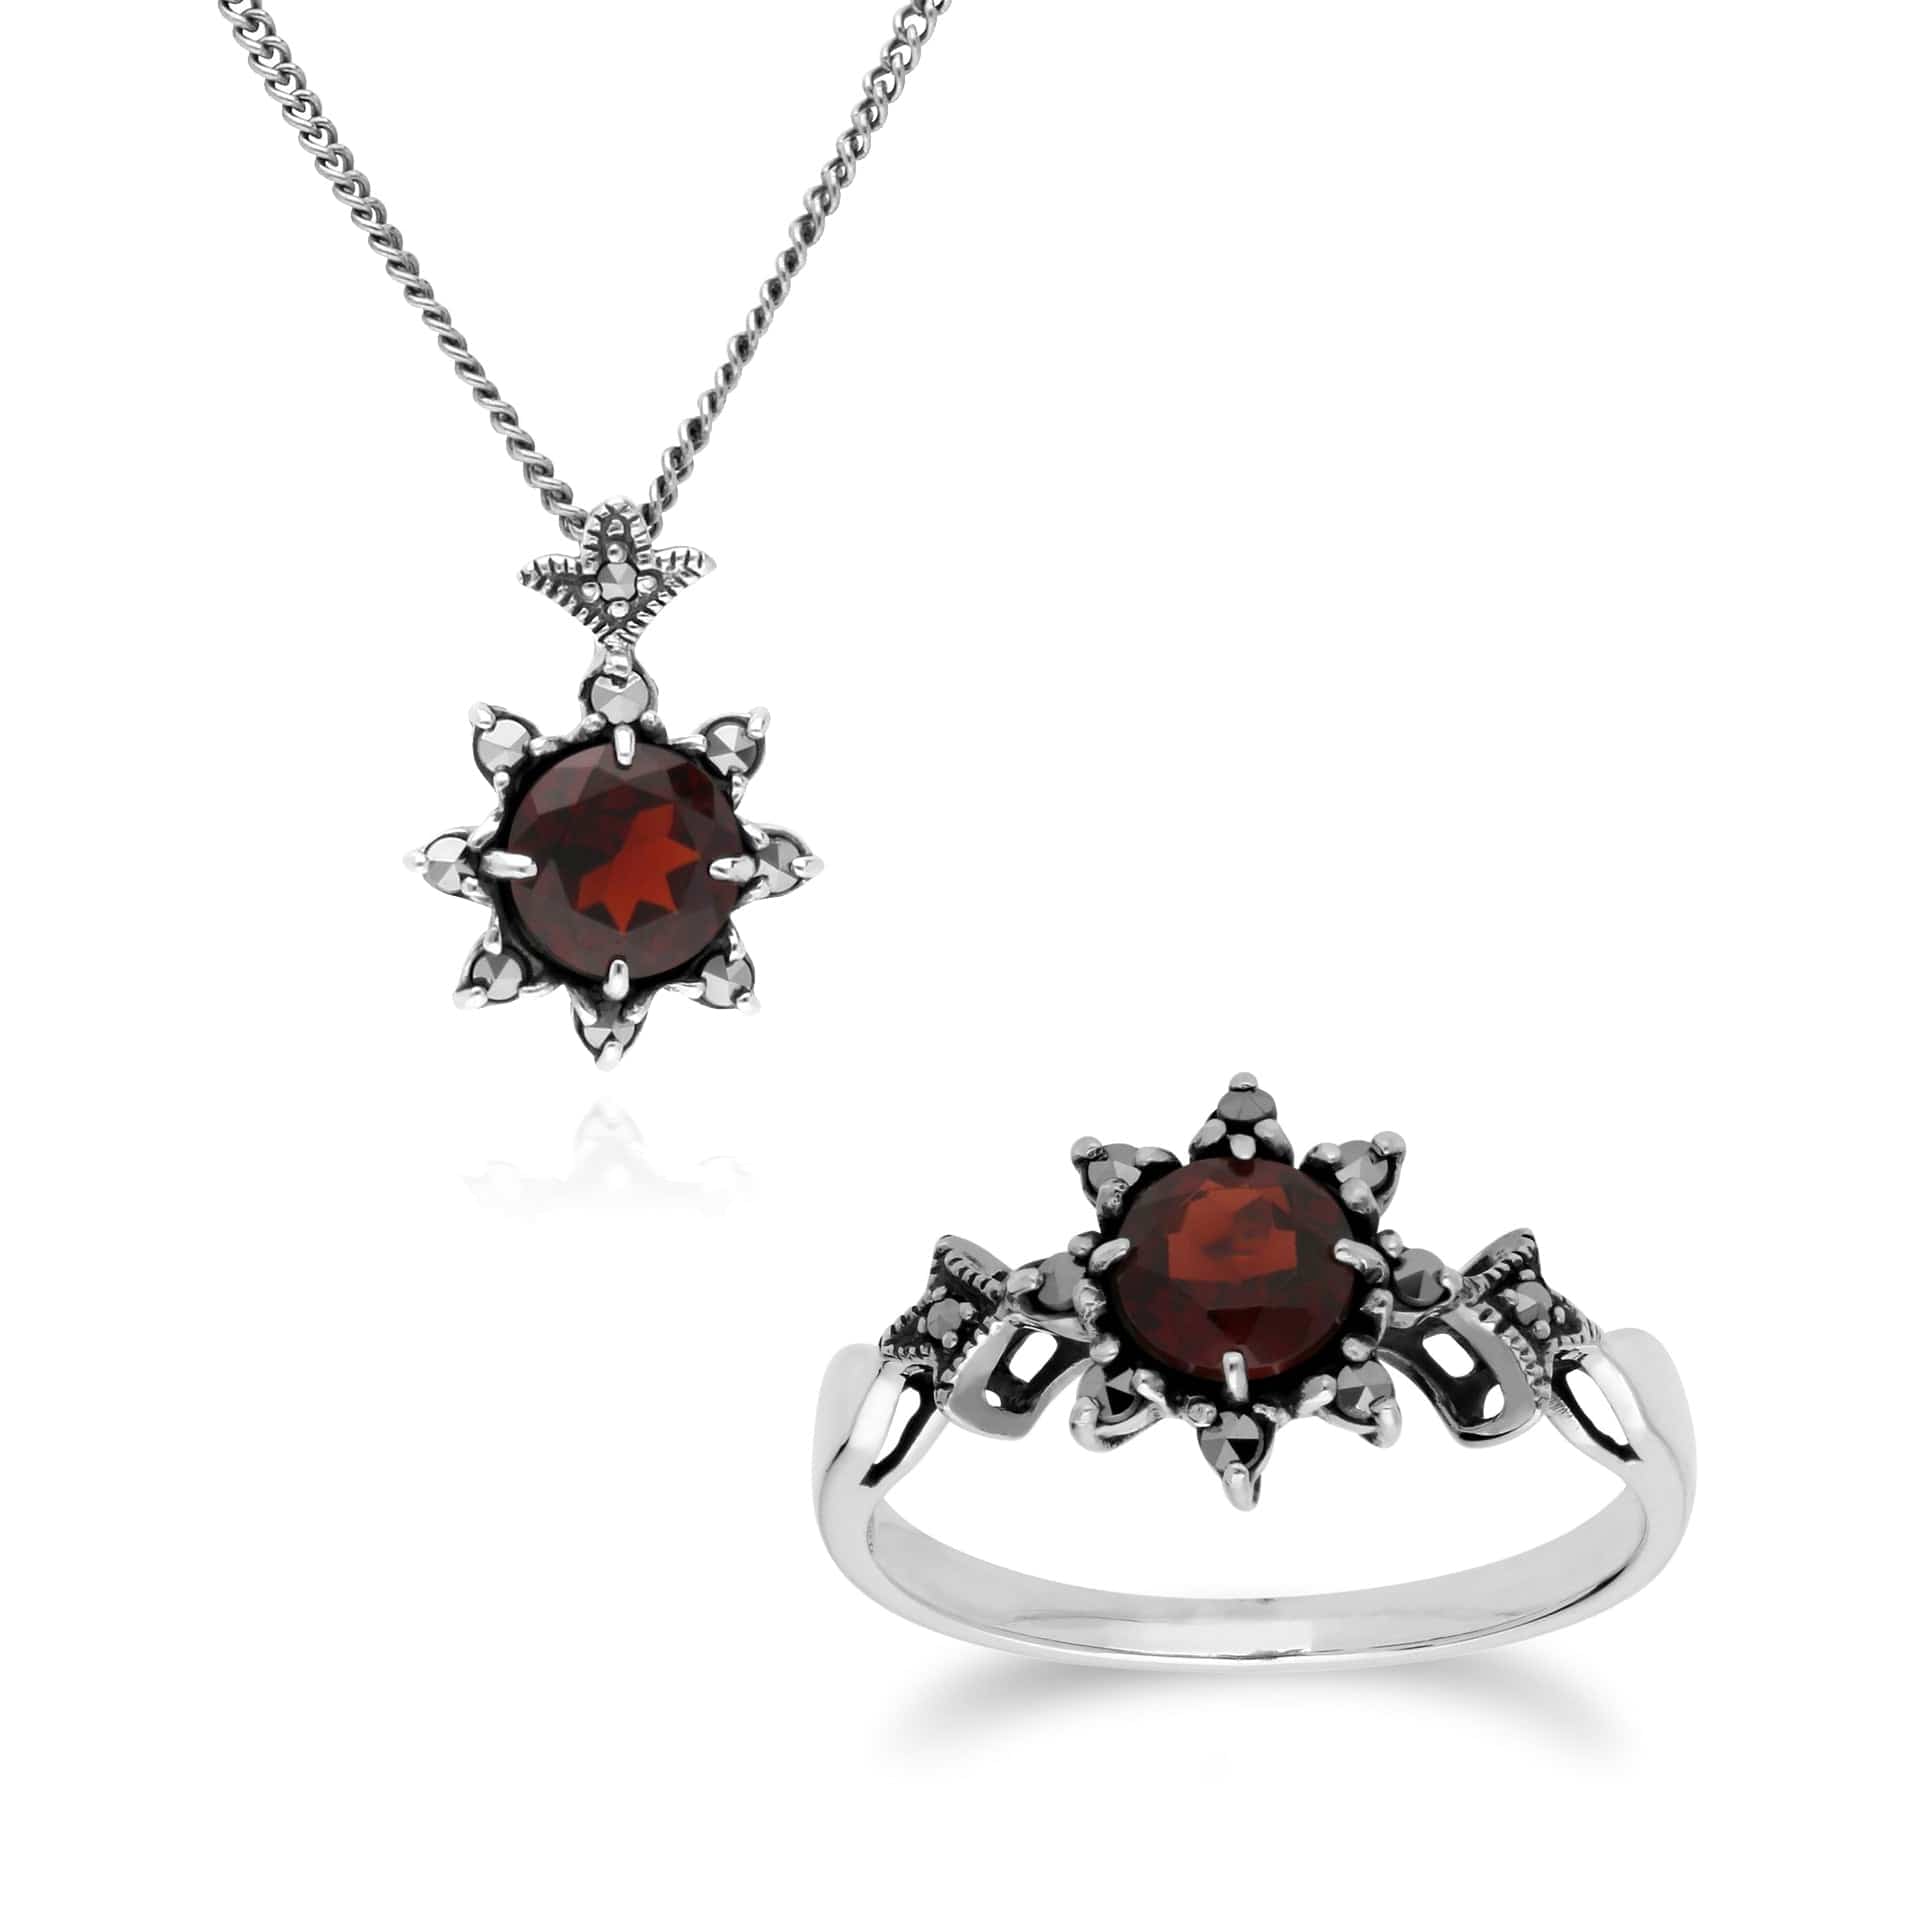 214N696003925-214R599503925 Art Nouveau Style Style Round Garnet & Marcasite Starburst Pendant & Ring Set in 925 Sterling Silver 1